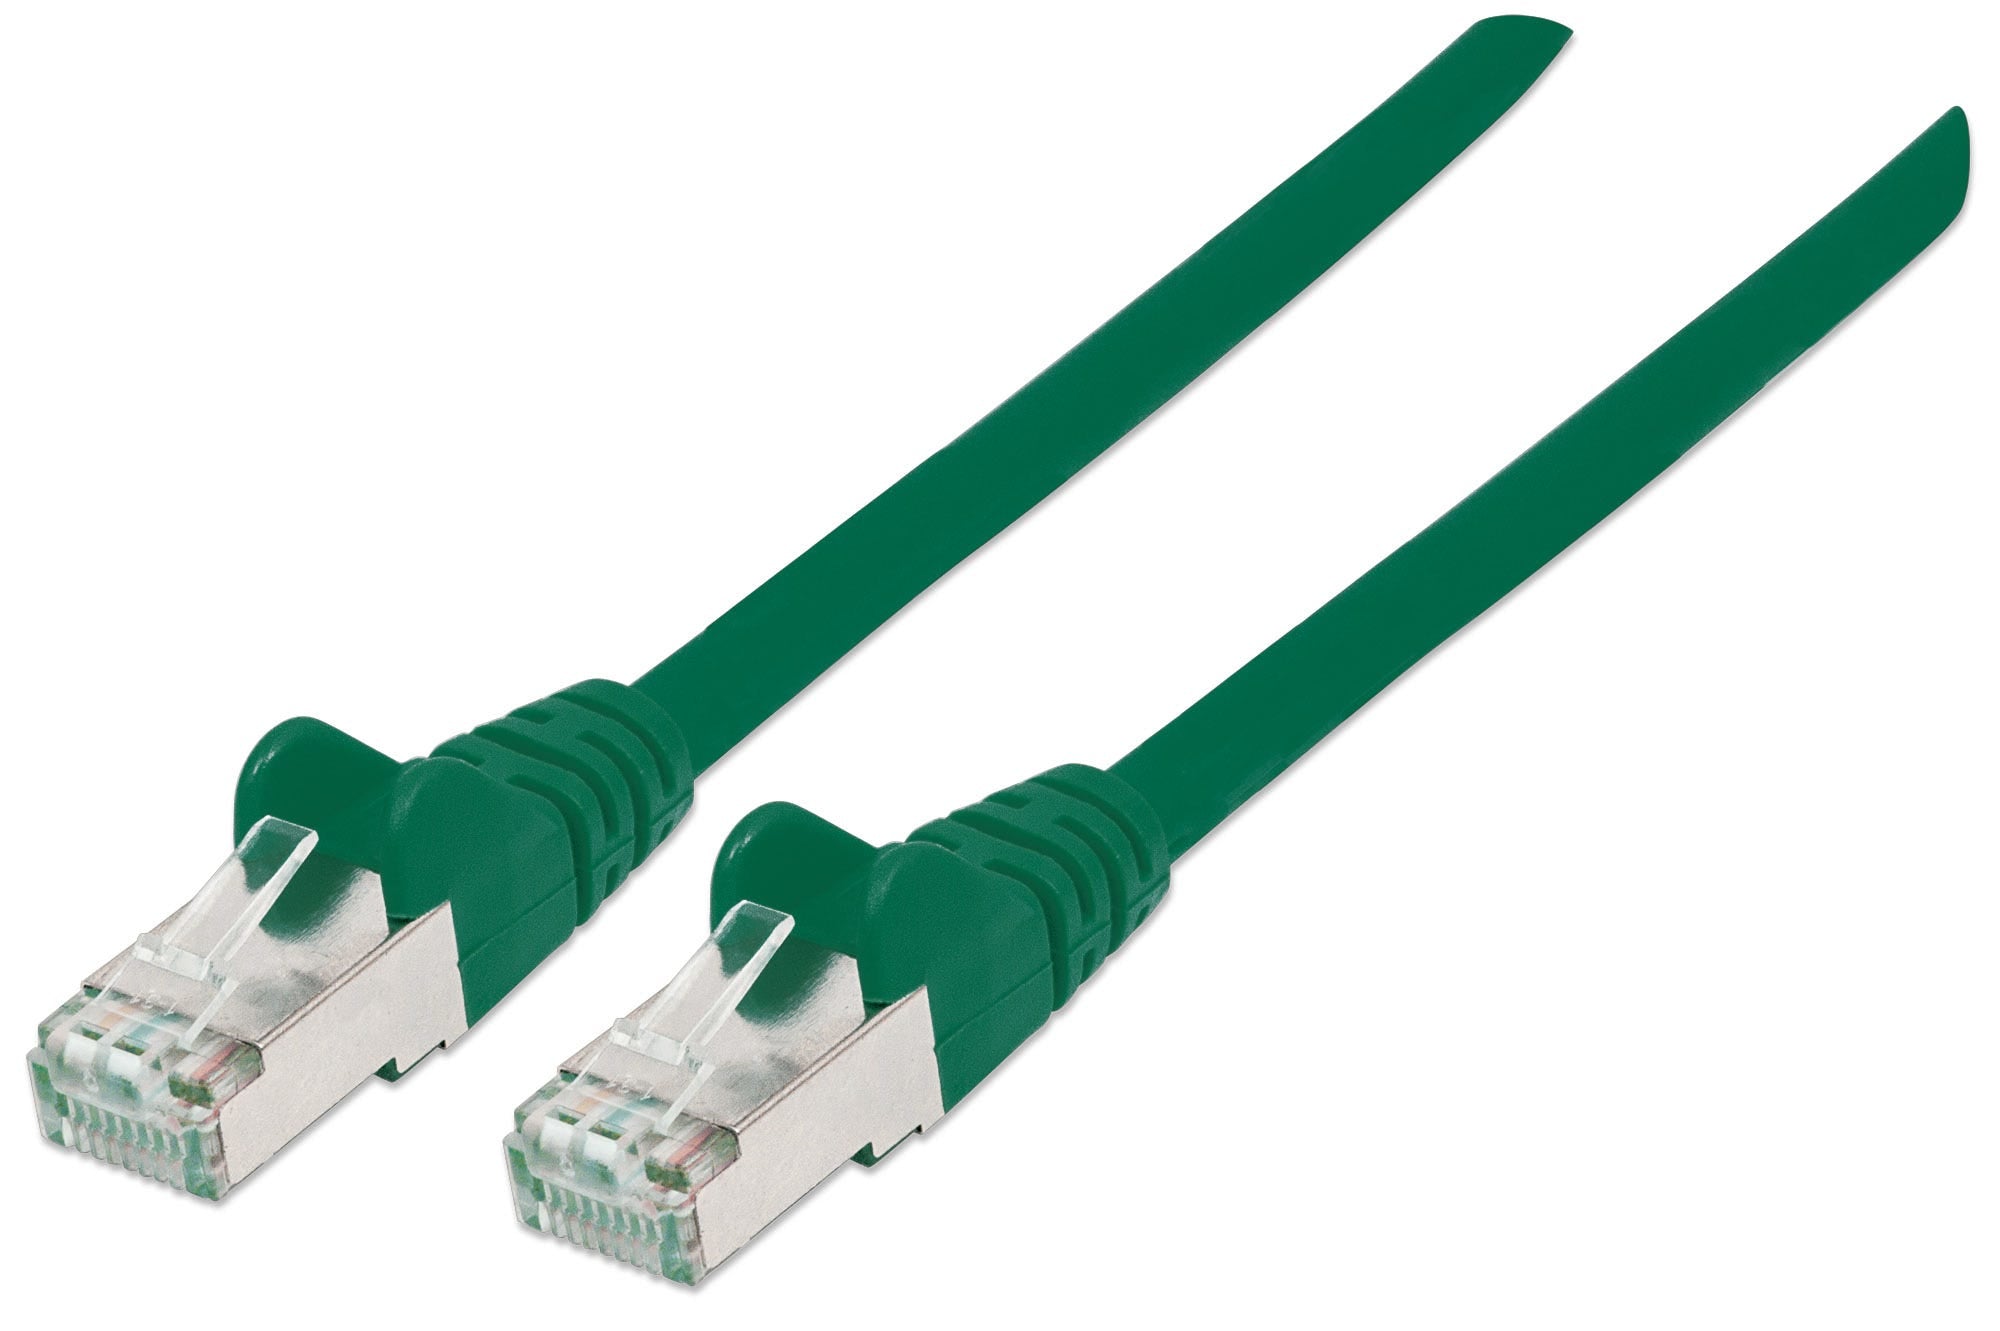 Intellinet Network Patch Cable, Cat6A, 1m, Green, Copper, S/FTP, LSOH / LSZH, PVC, RJ45, Gold Plated Contacts, Snagless, Booted, Lifetime Warranty, Polybag